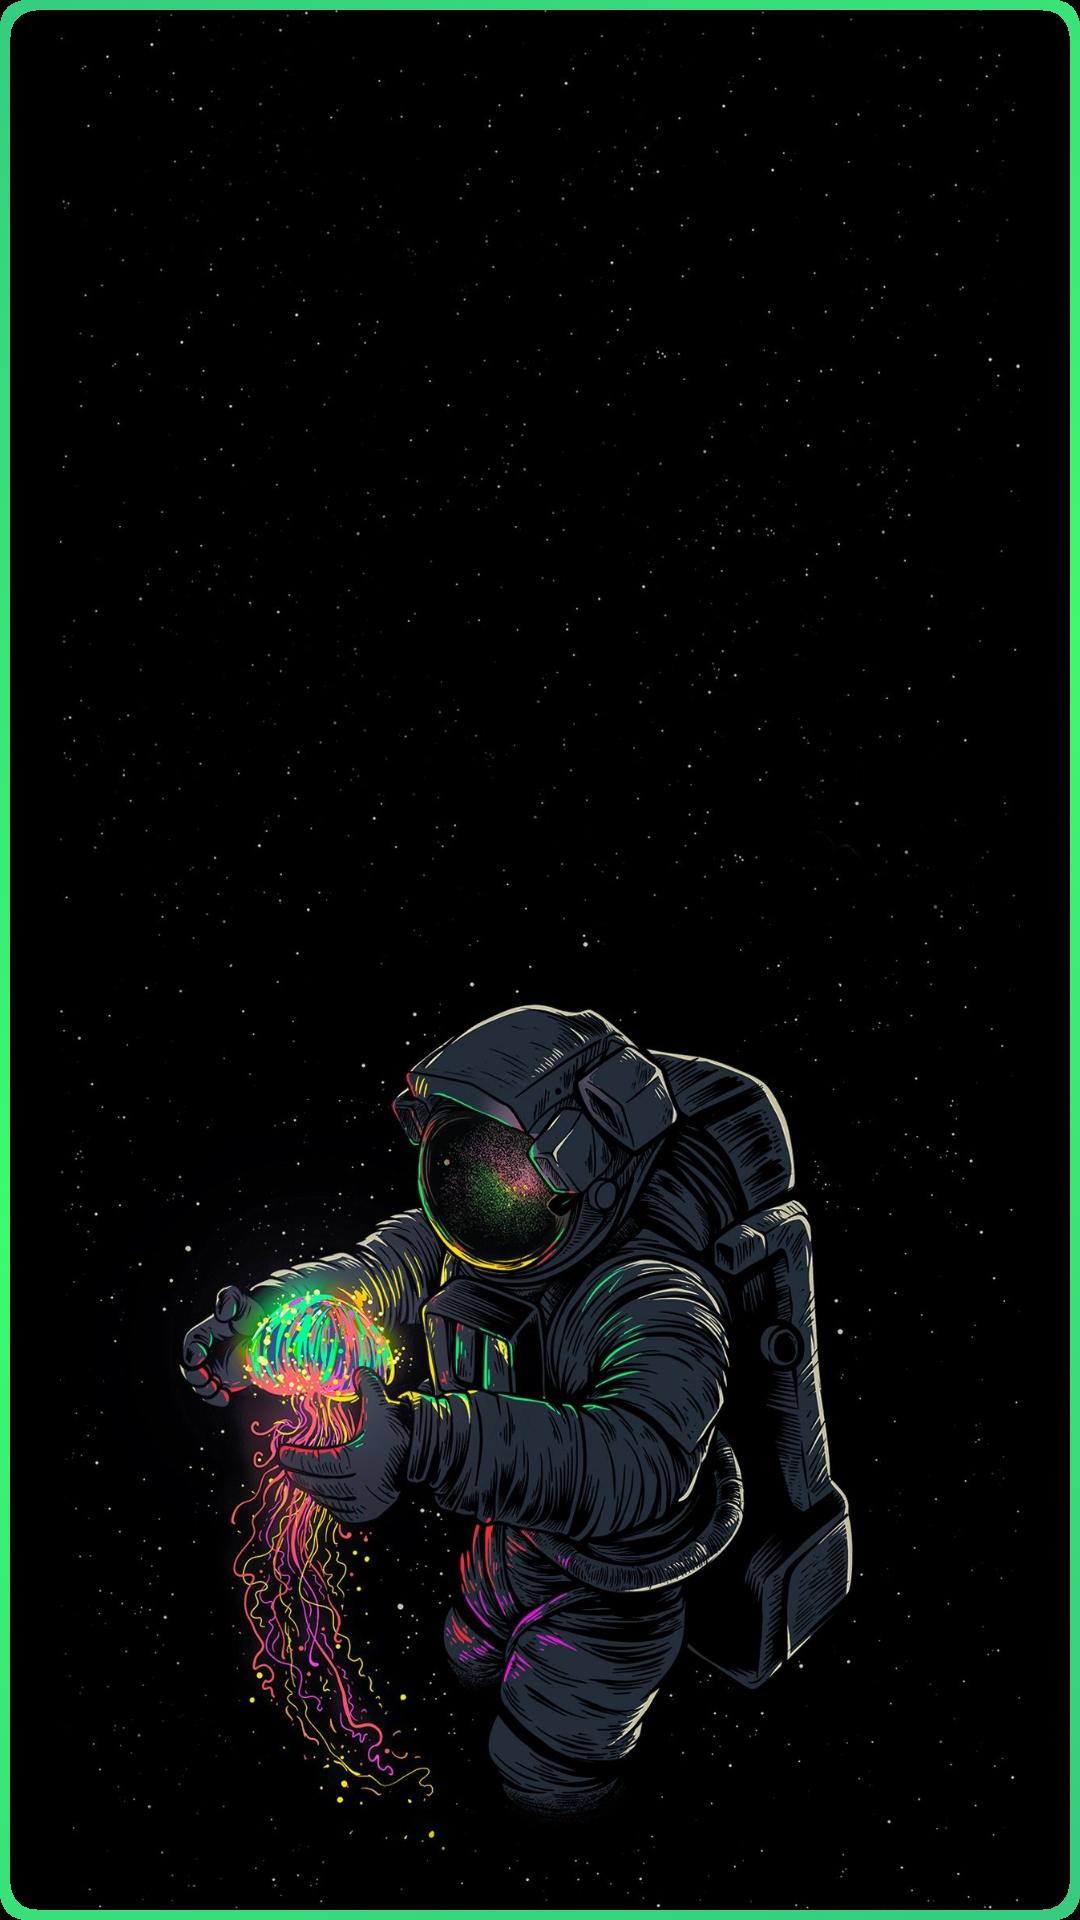 Edited this into a amoled wallpaper and added the coloured border. More in comments. (1080×1920)